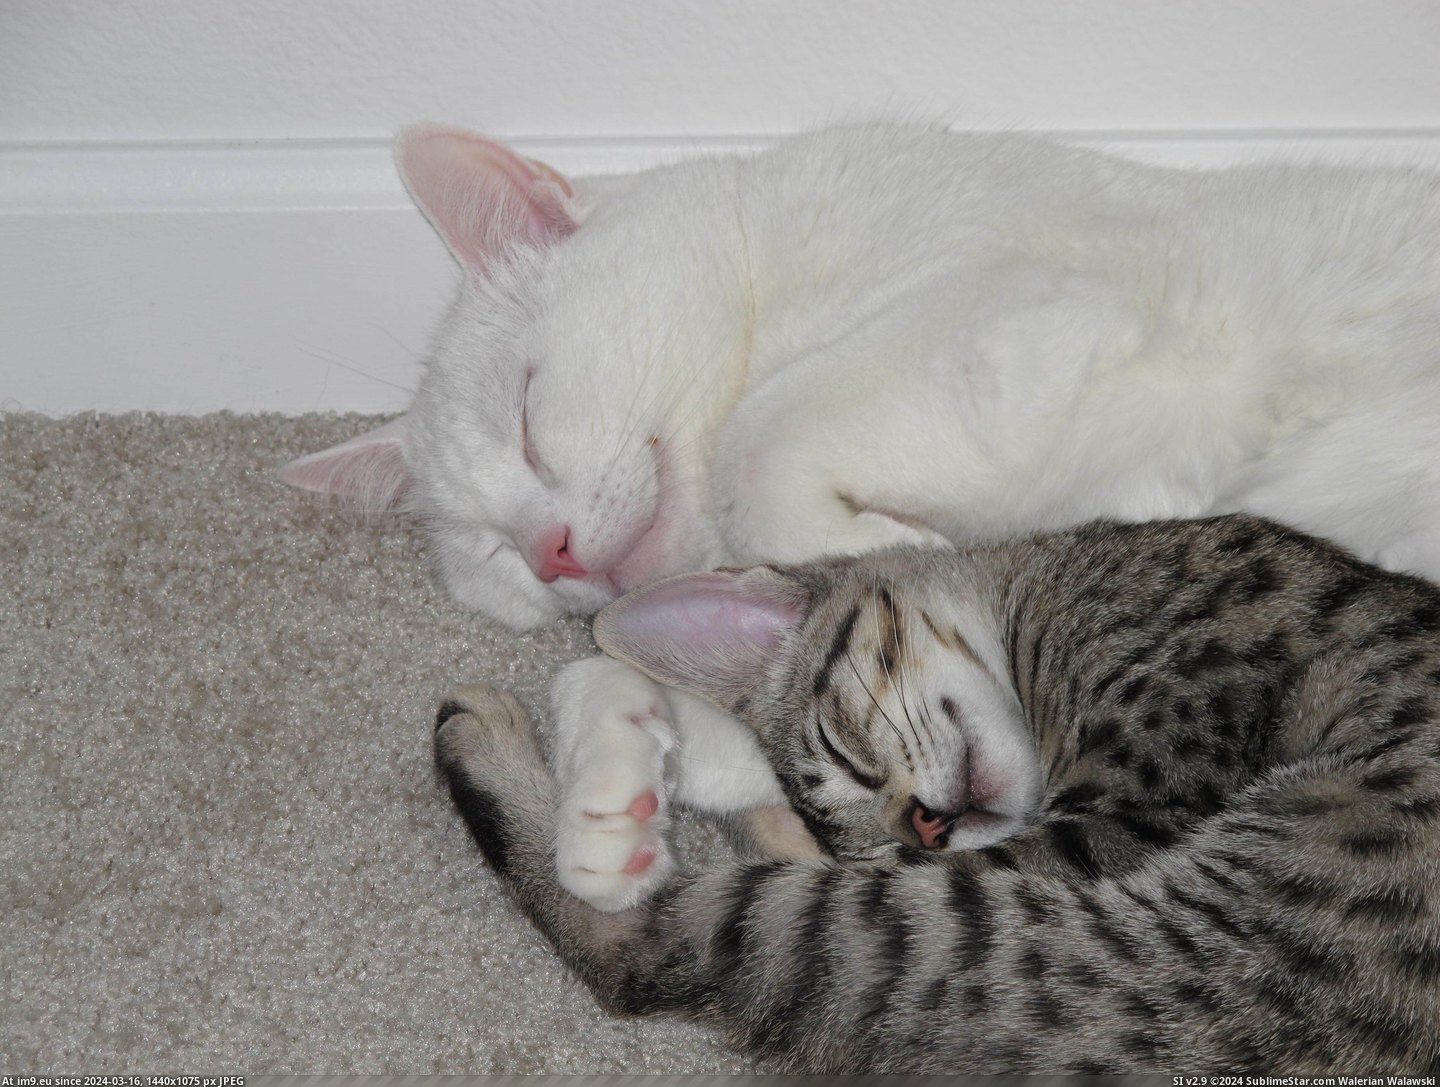 #Cats  #Inseparable [Cats] They're inseparable. 7 Pic. (Bild von album My r/CATS favs))